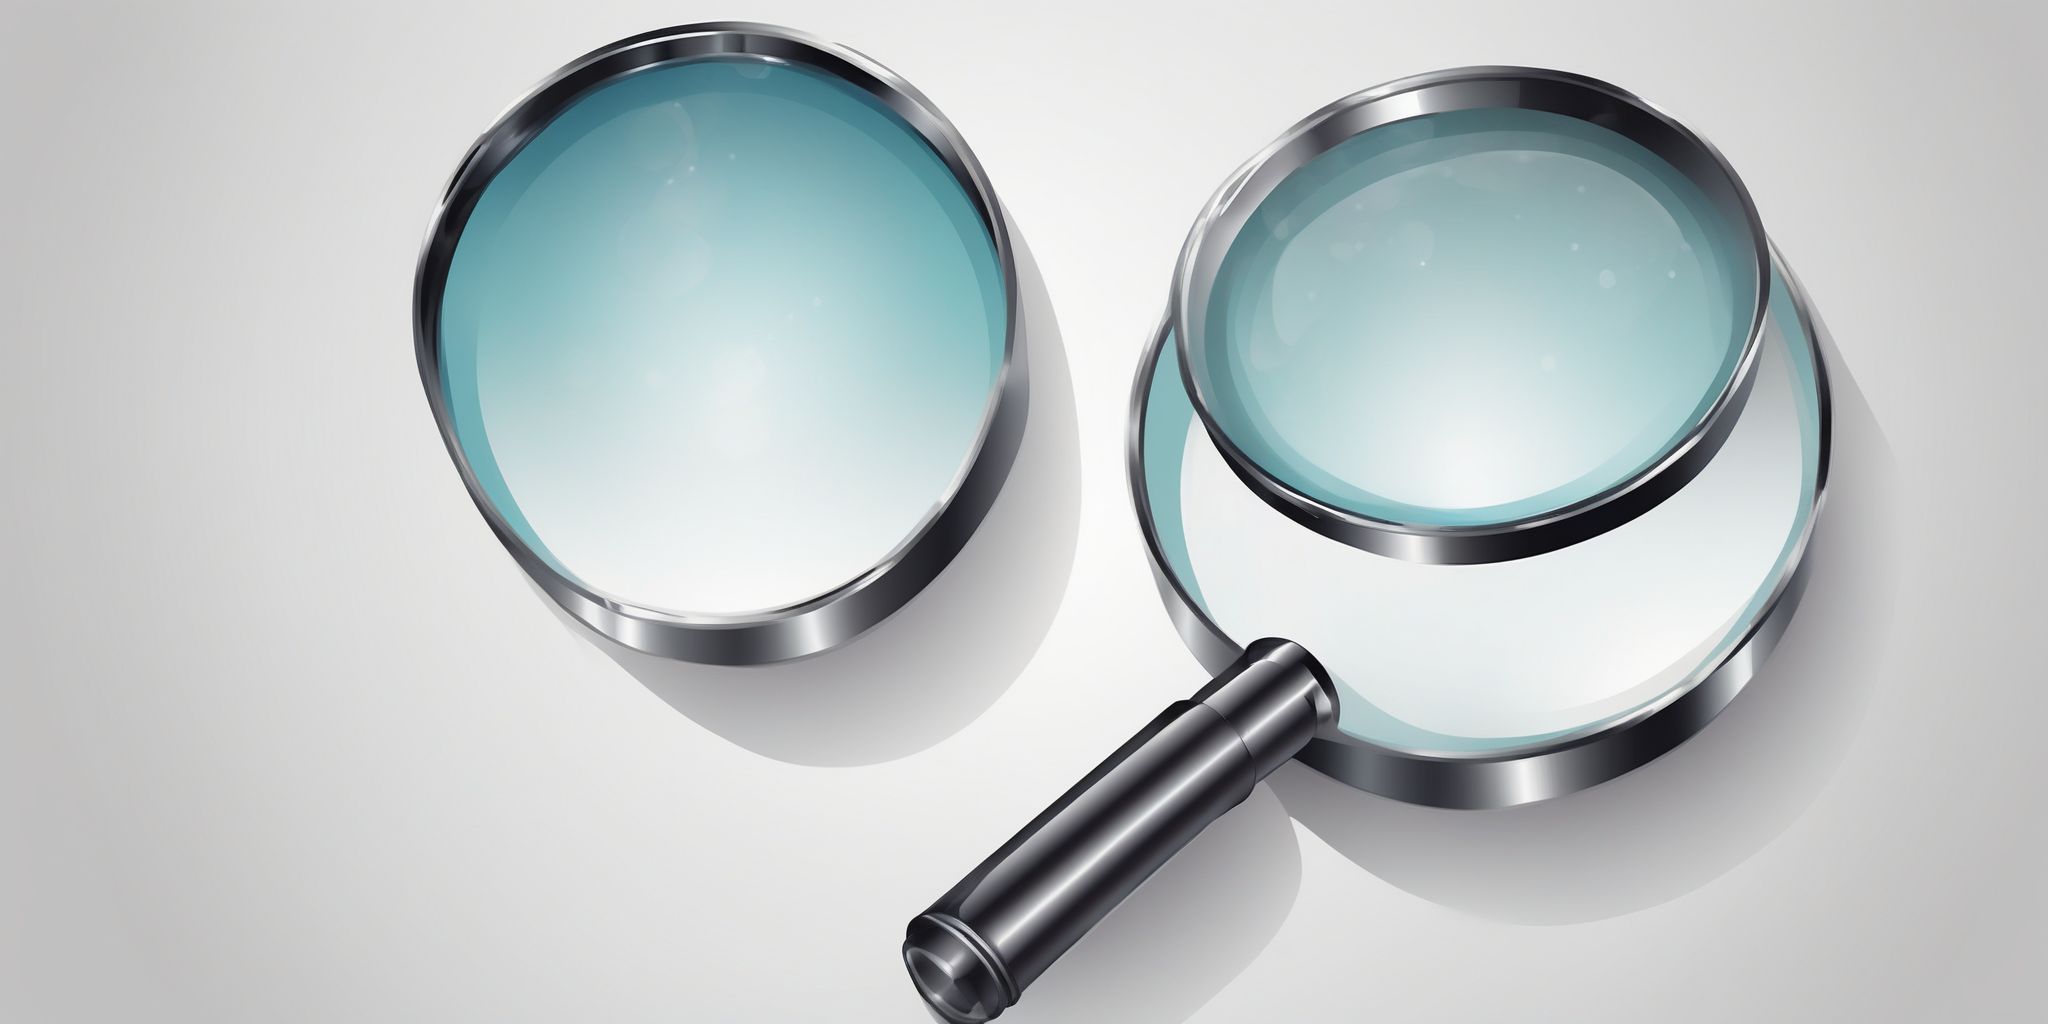 Magnifying glass in illustration style with gradients and white background